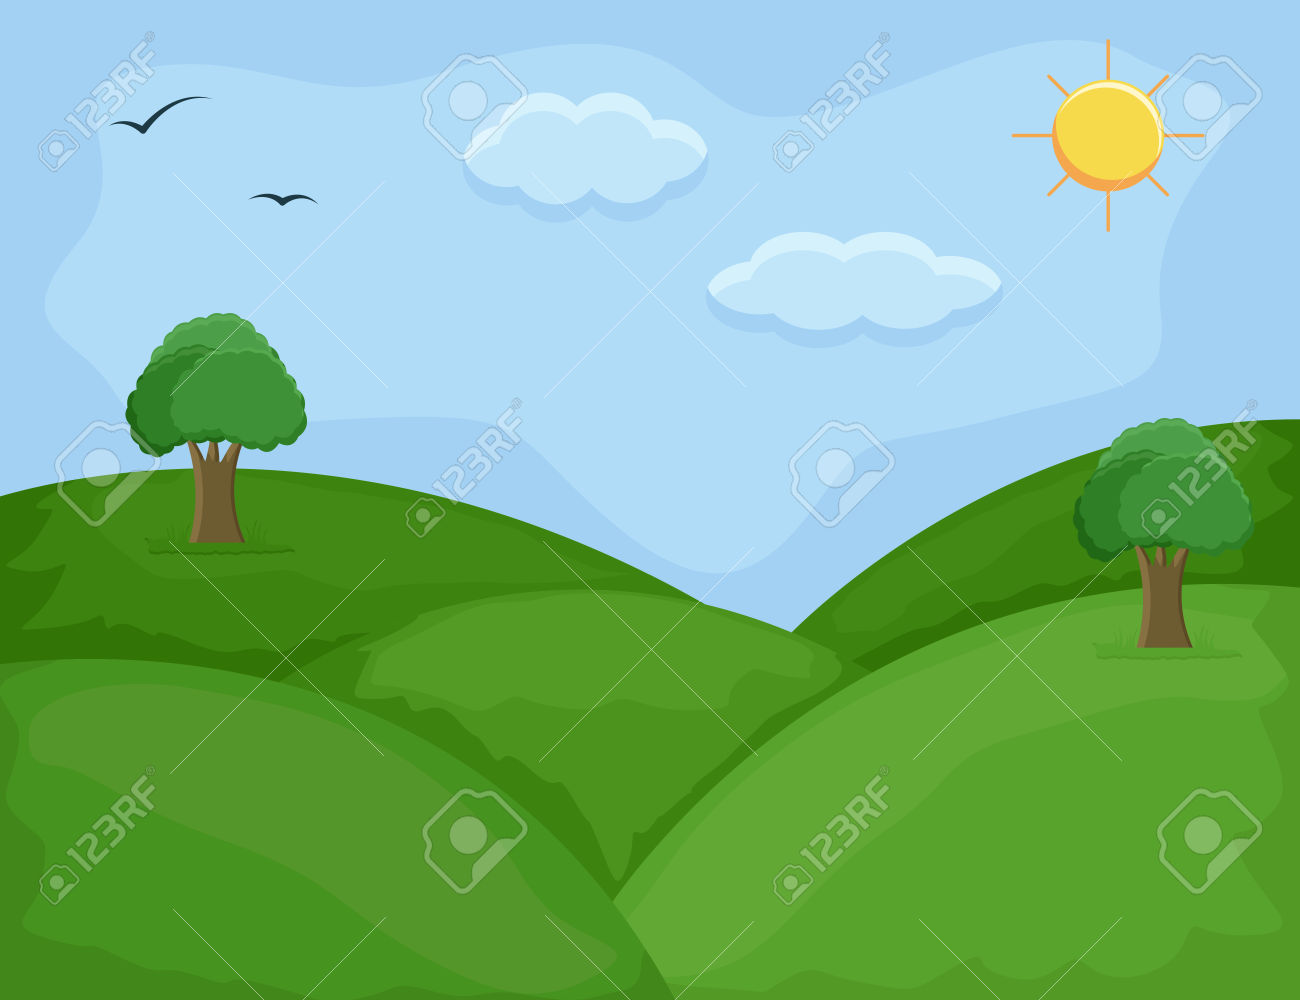 Hills clipart, Hills Transparent FREE for download on